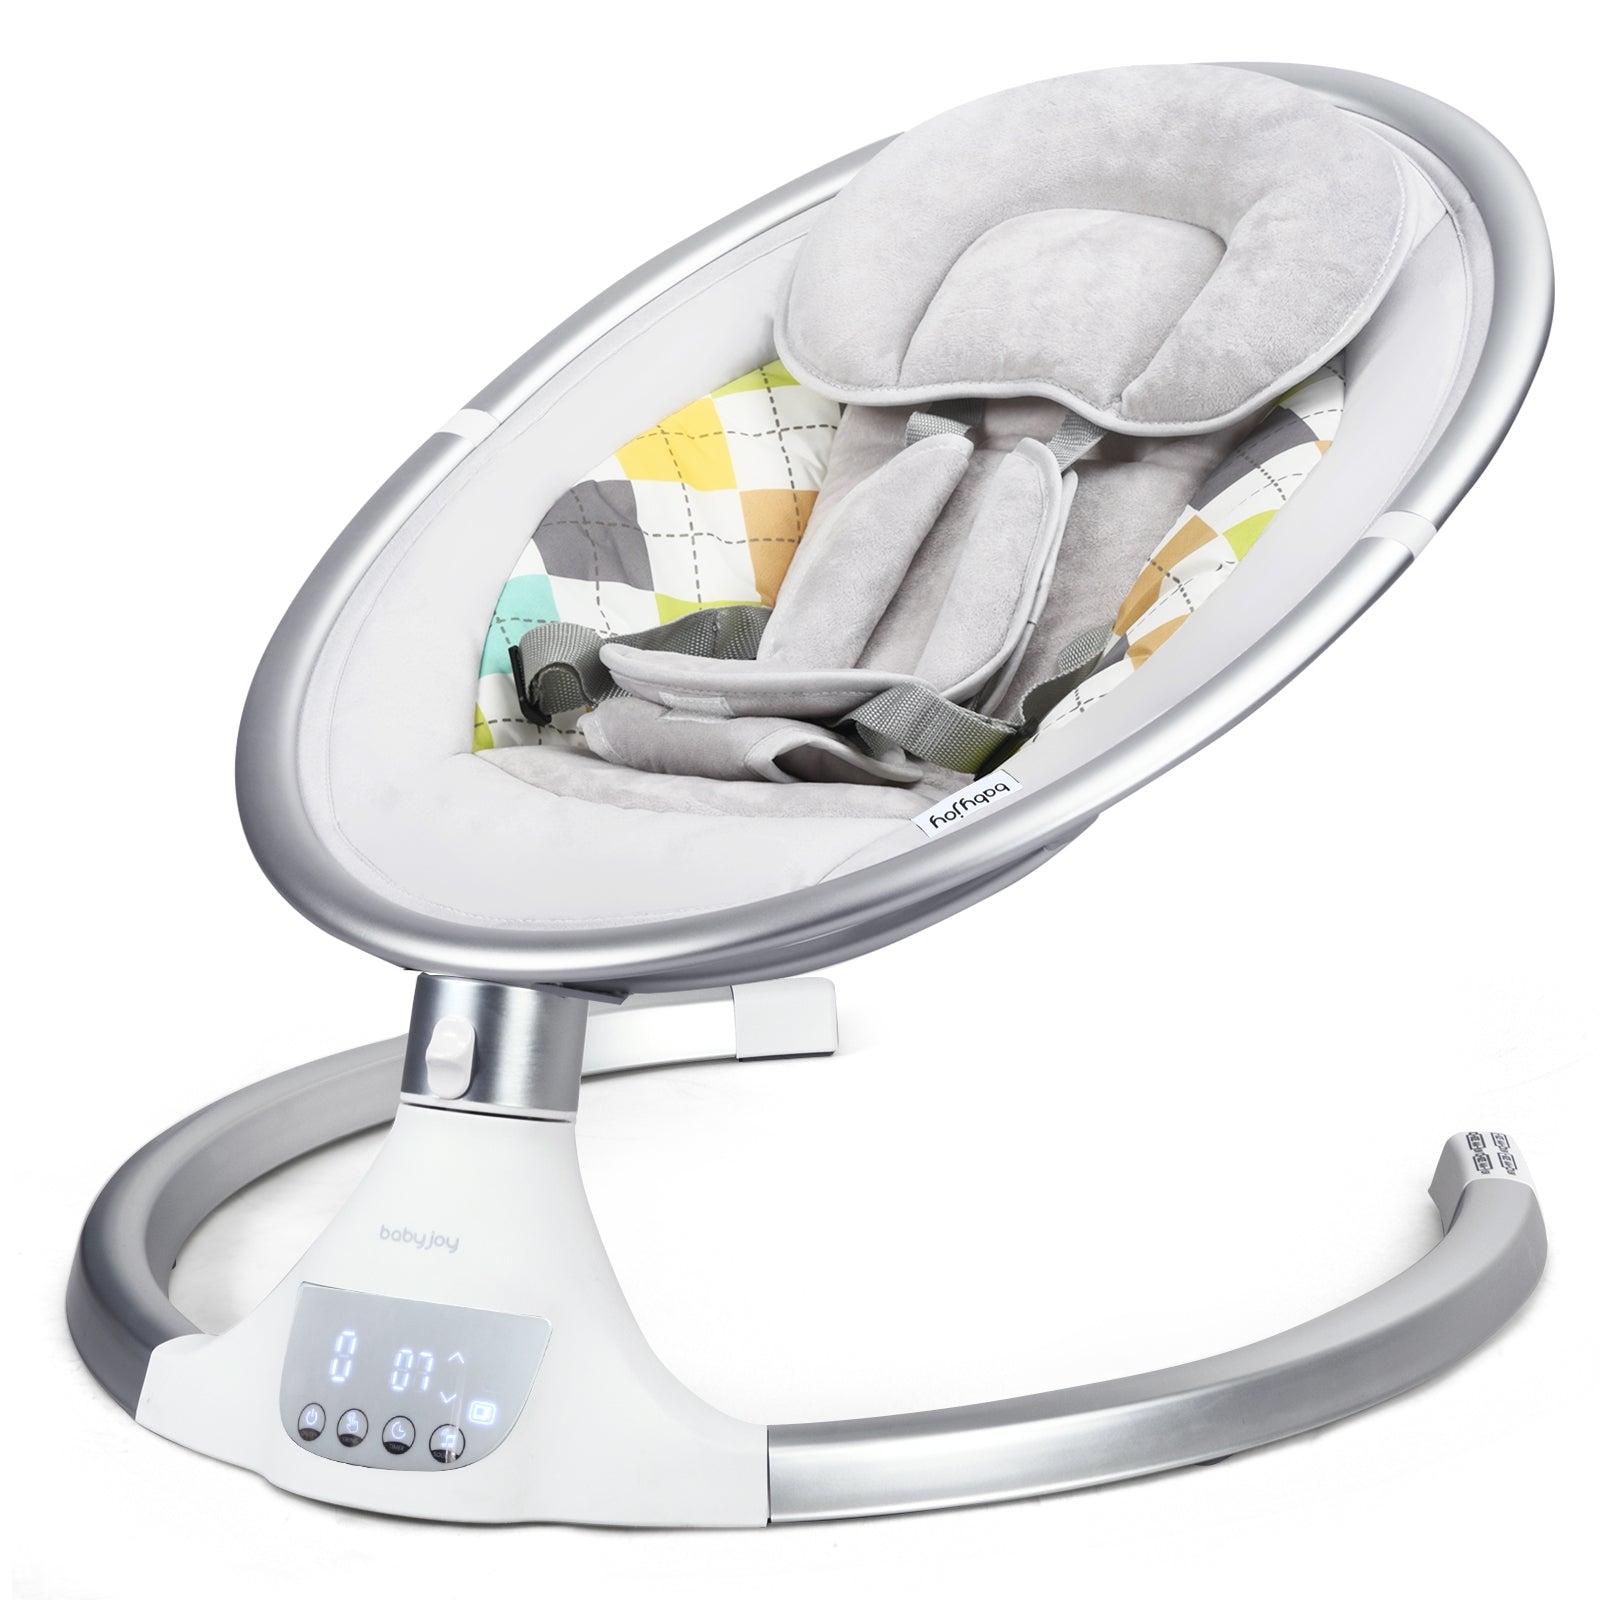 Remote Control Portable Baby Swing Electric Rocking Chair with Music Timer and Net Cover